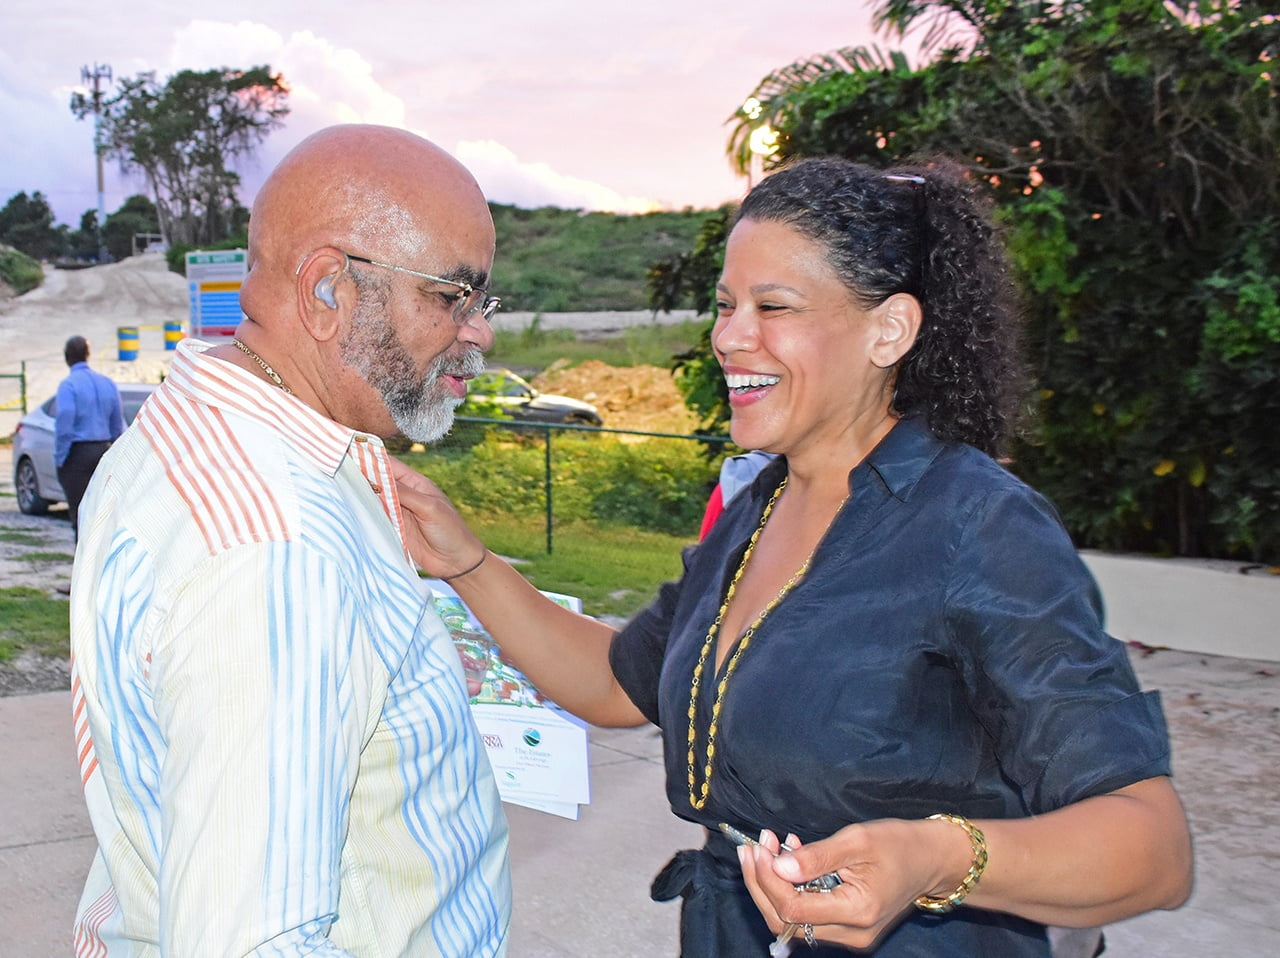 Kim Brooks (right) welcoming Charles Edwards to BARP’s wine-tasting session recently.